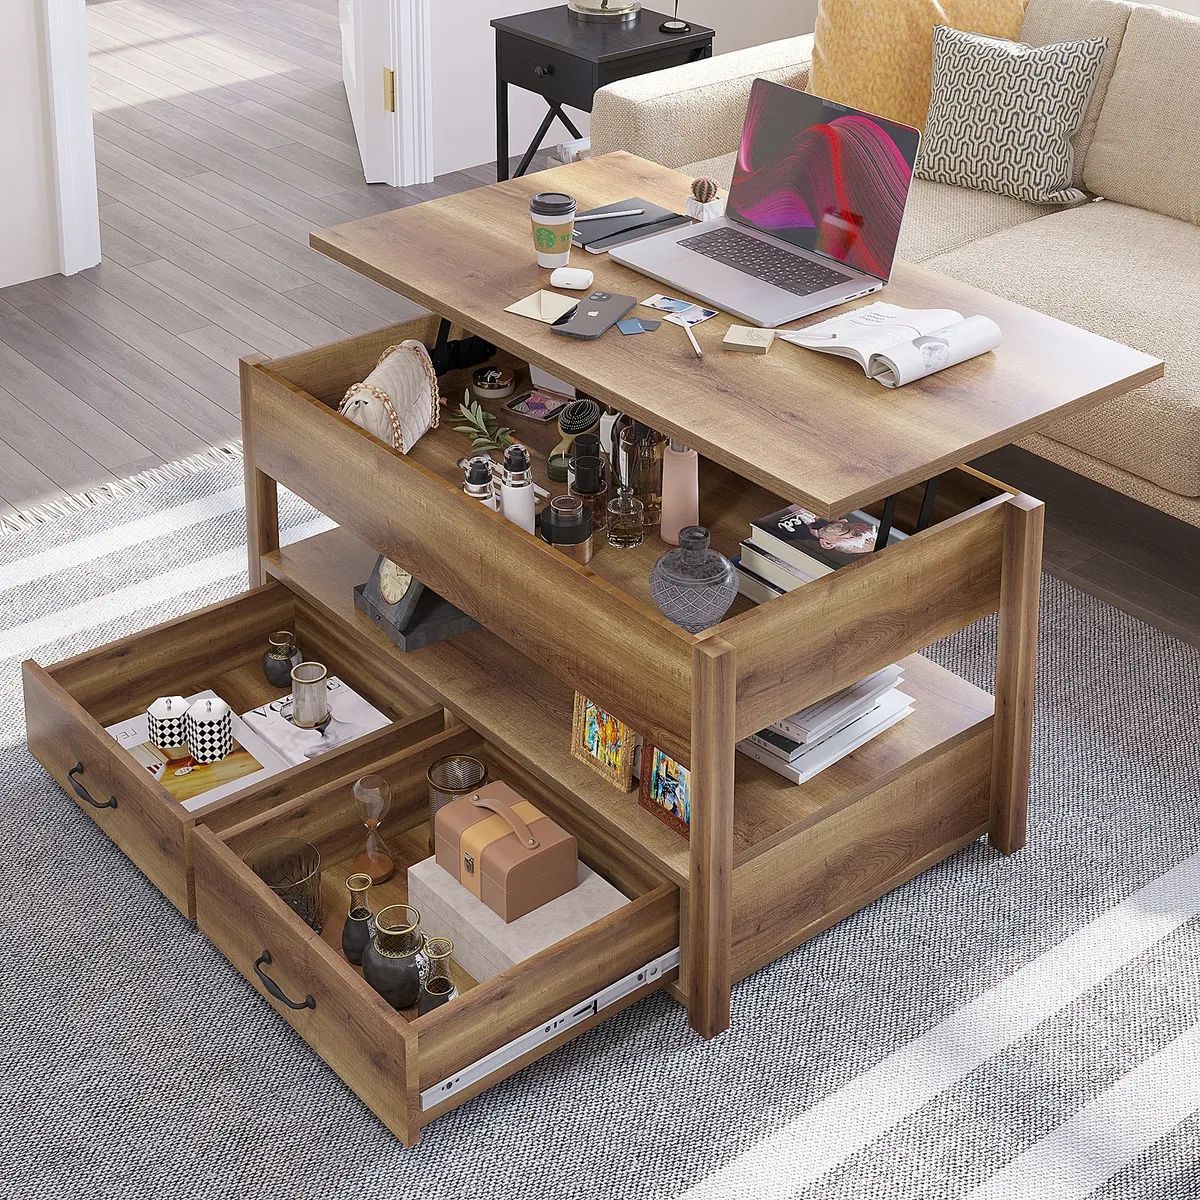 2 Drawer Lift Top Coffee Table Wooden With Hidden Compartment & Storage  Shelves | Ebay Intended For Lift Top Coffee Tables With Storage (View 5 of 15)